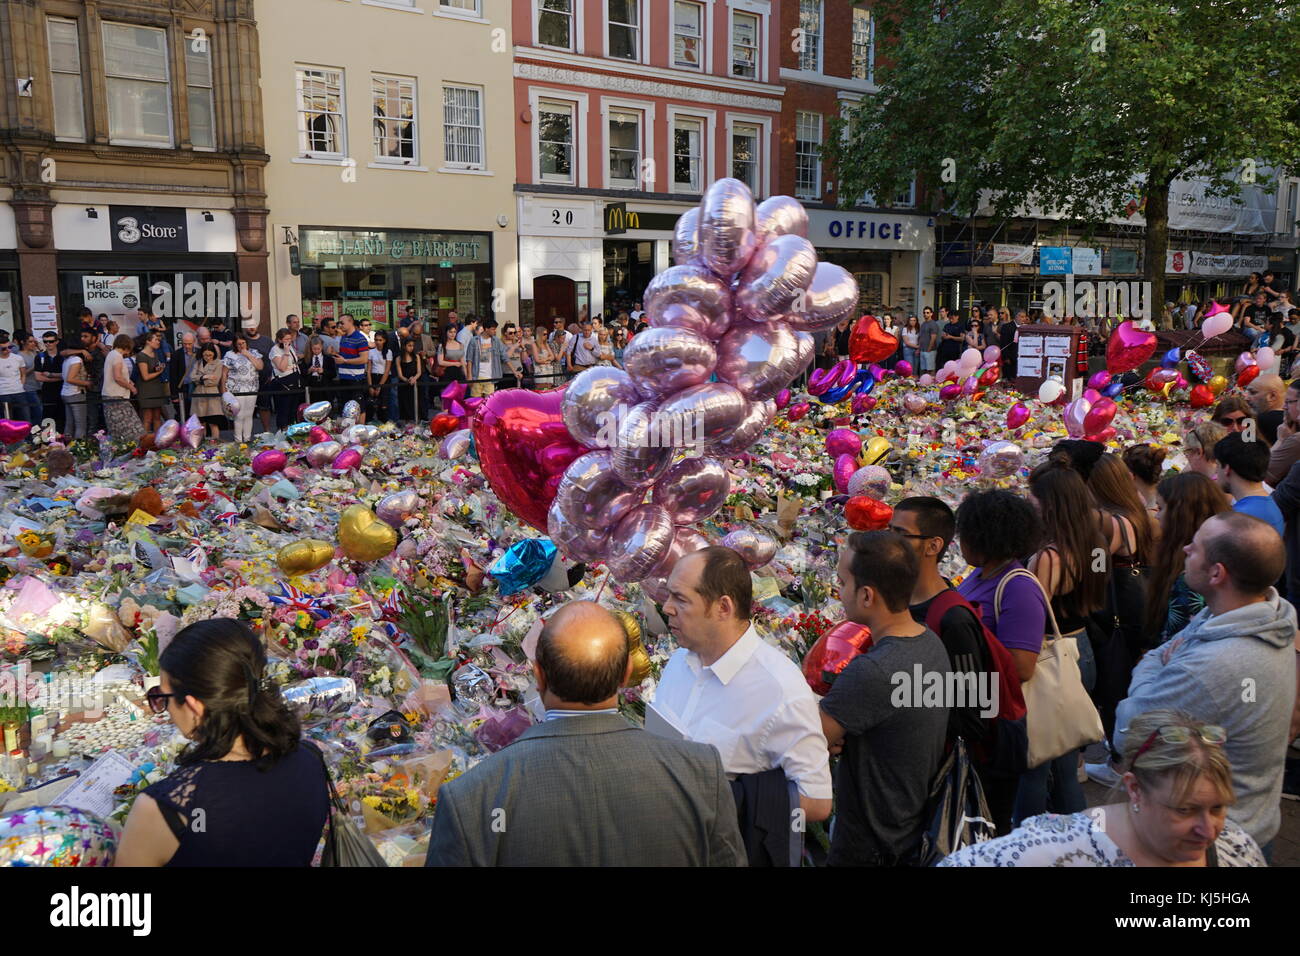 Vigil in St Ann's Square, Manchester, during the days following the 22 May 2017, suicide bombing, carried out at Manchester Arena in Manchester, England, following a concert by American singer Ariana Grande. Stock Photo